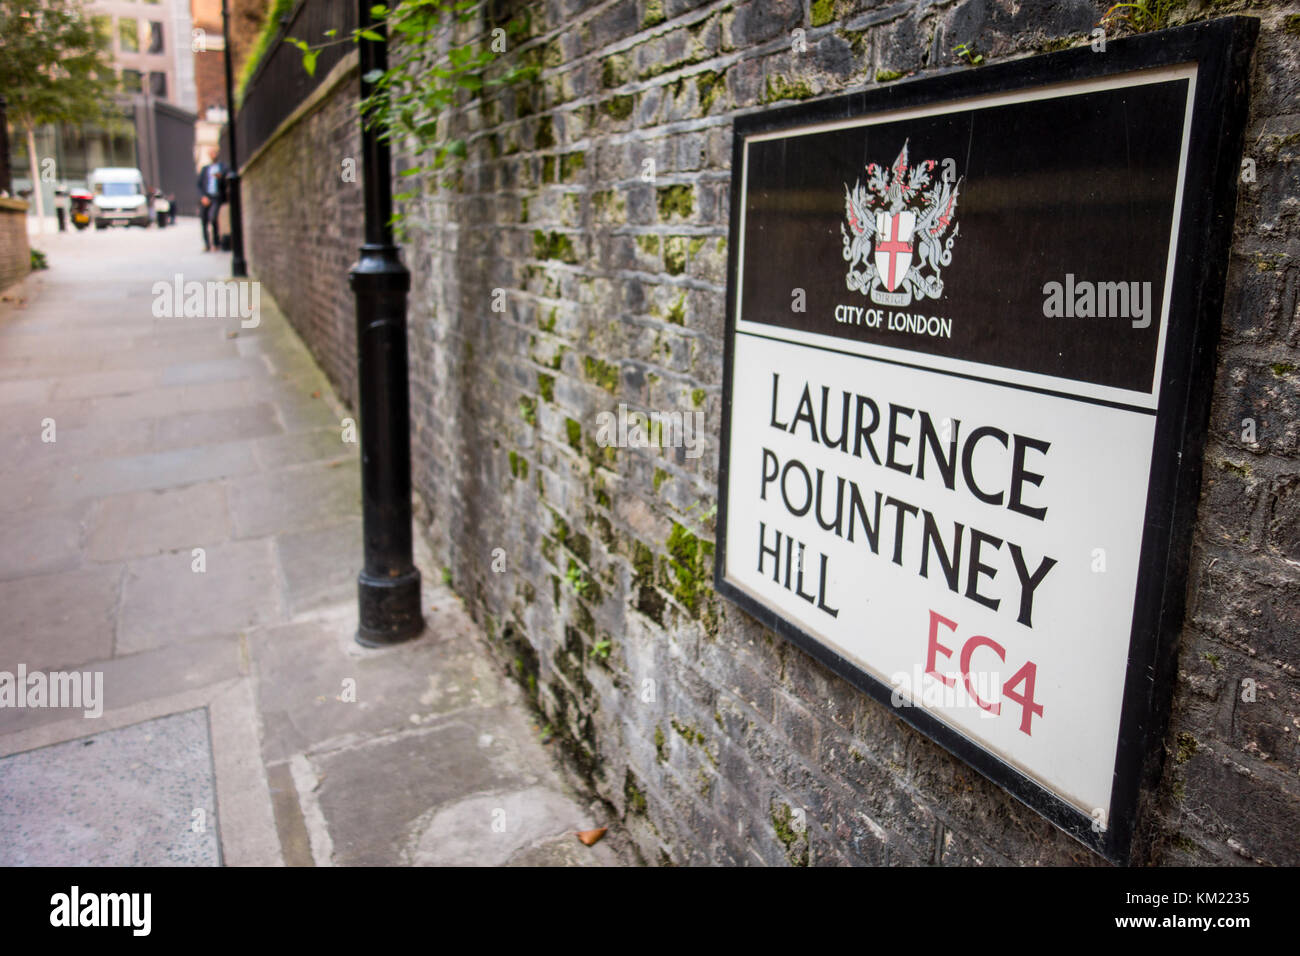 Street sign for Laurence Pountney Hill, City of London, UK Stock Photo